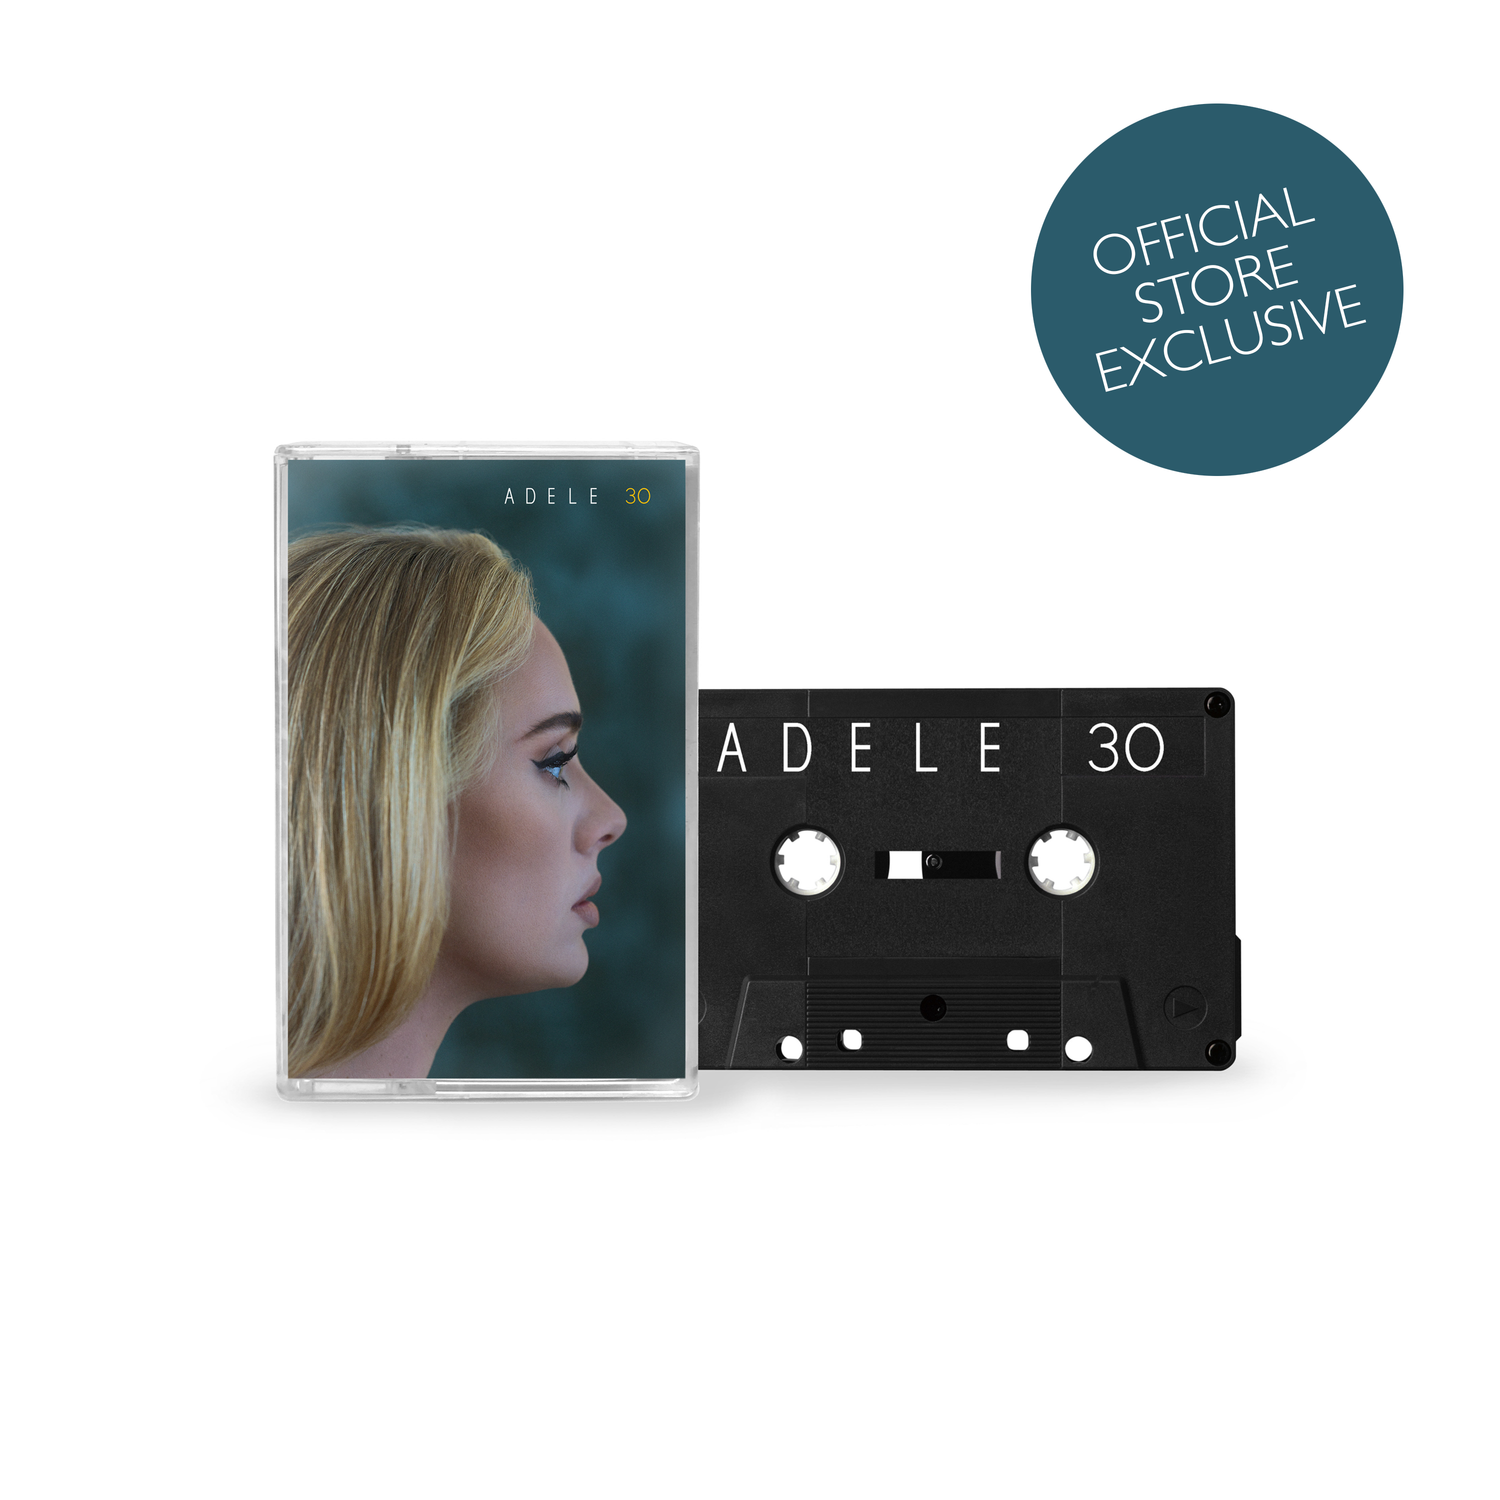 ADELE 30 – Adele | Official Store